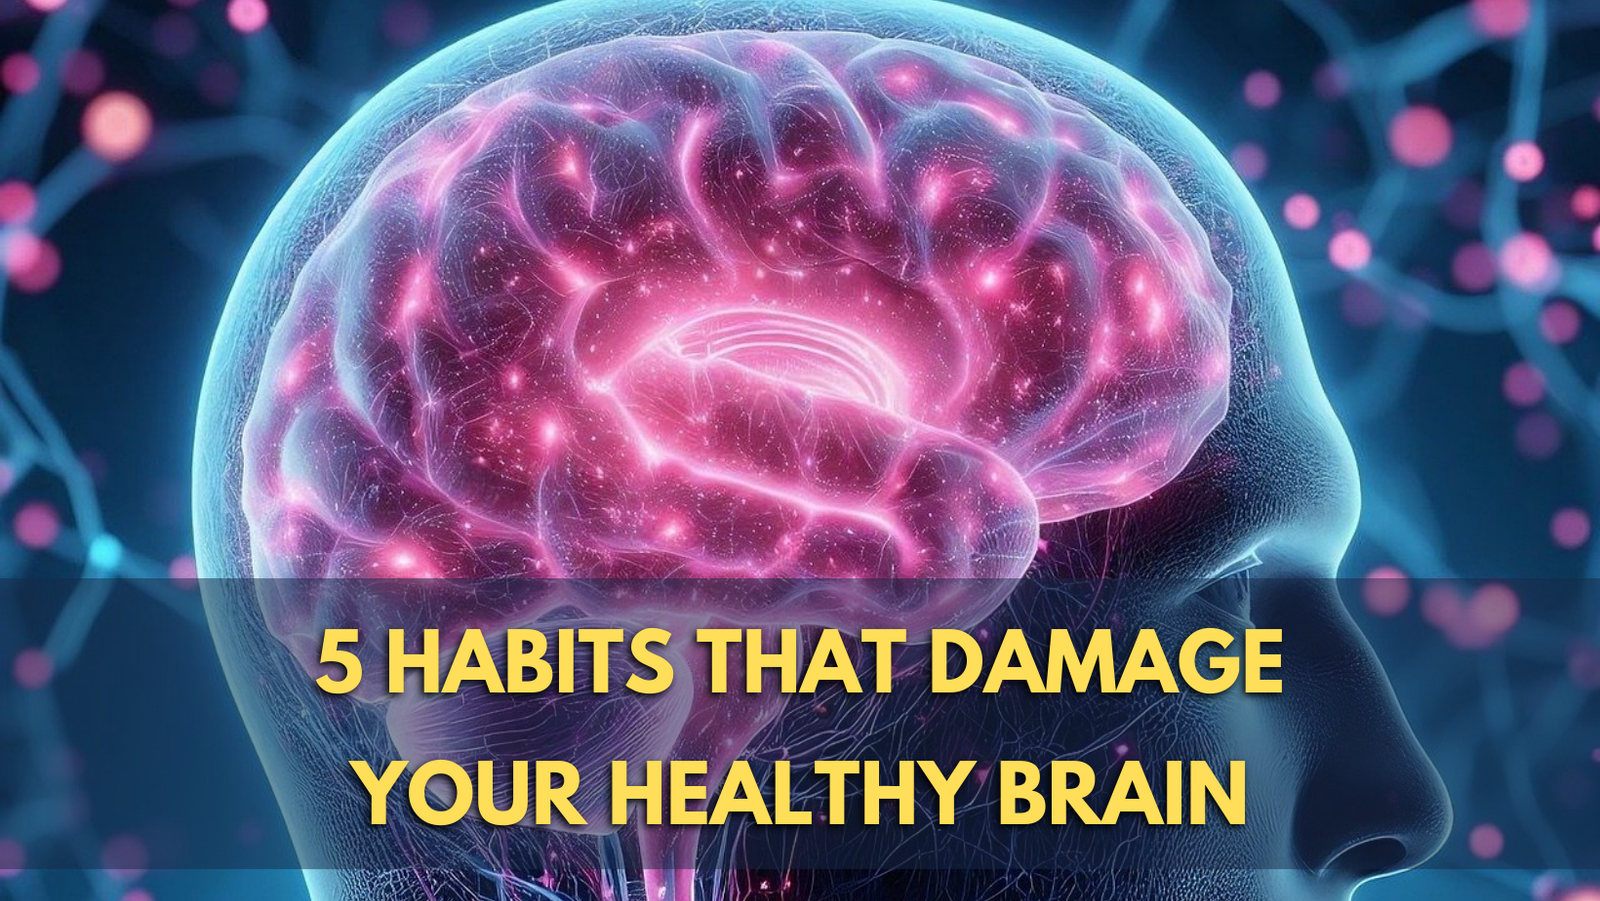 5 Habits that damage your healthy brain